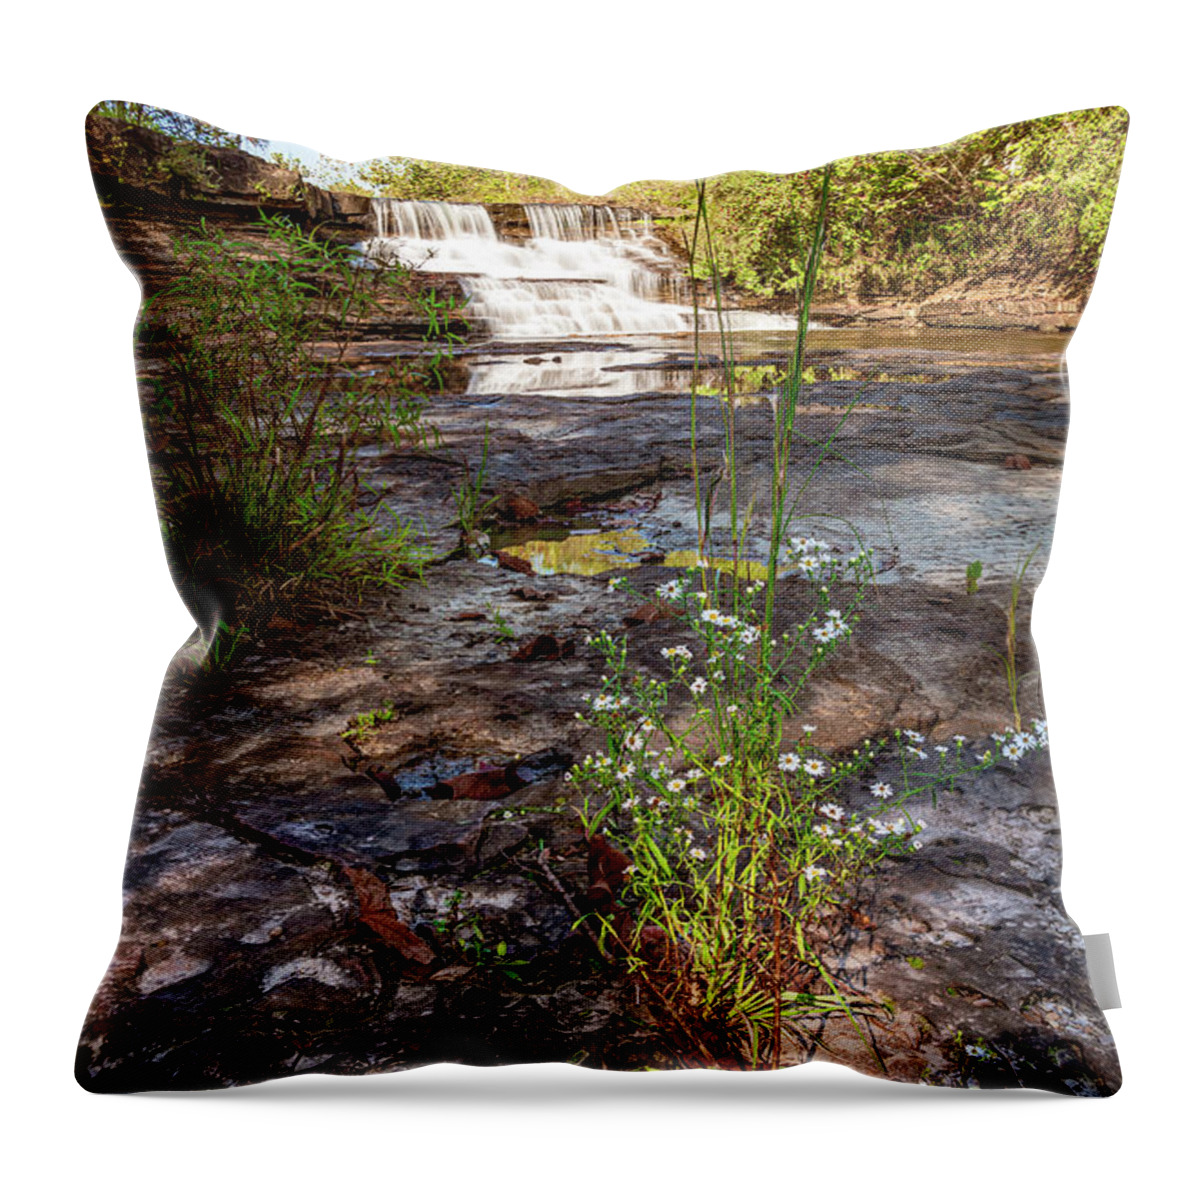 Landscape Throw Pillow featuring the photograph Kinkaid Spillway #1 by Grant Twiss